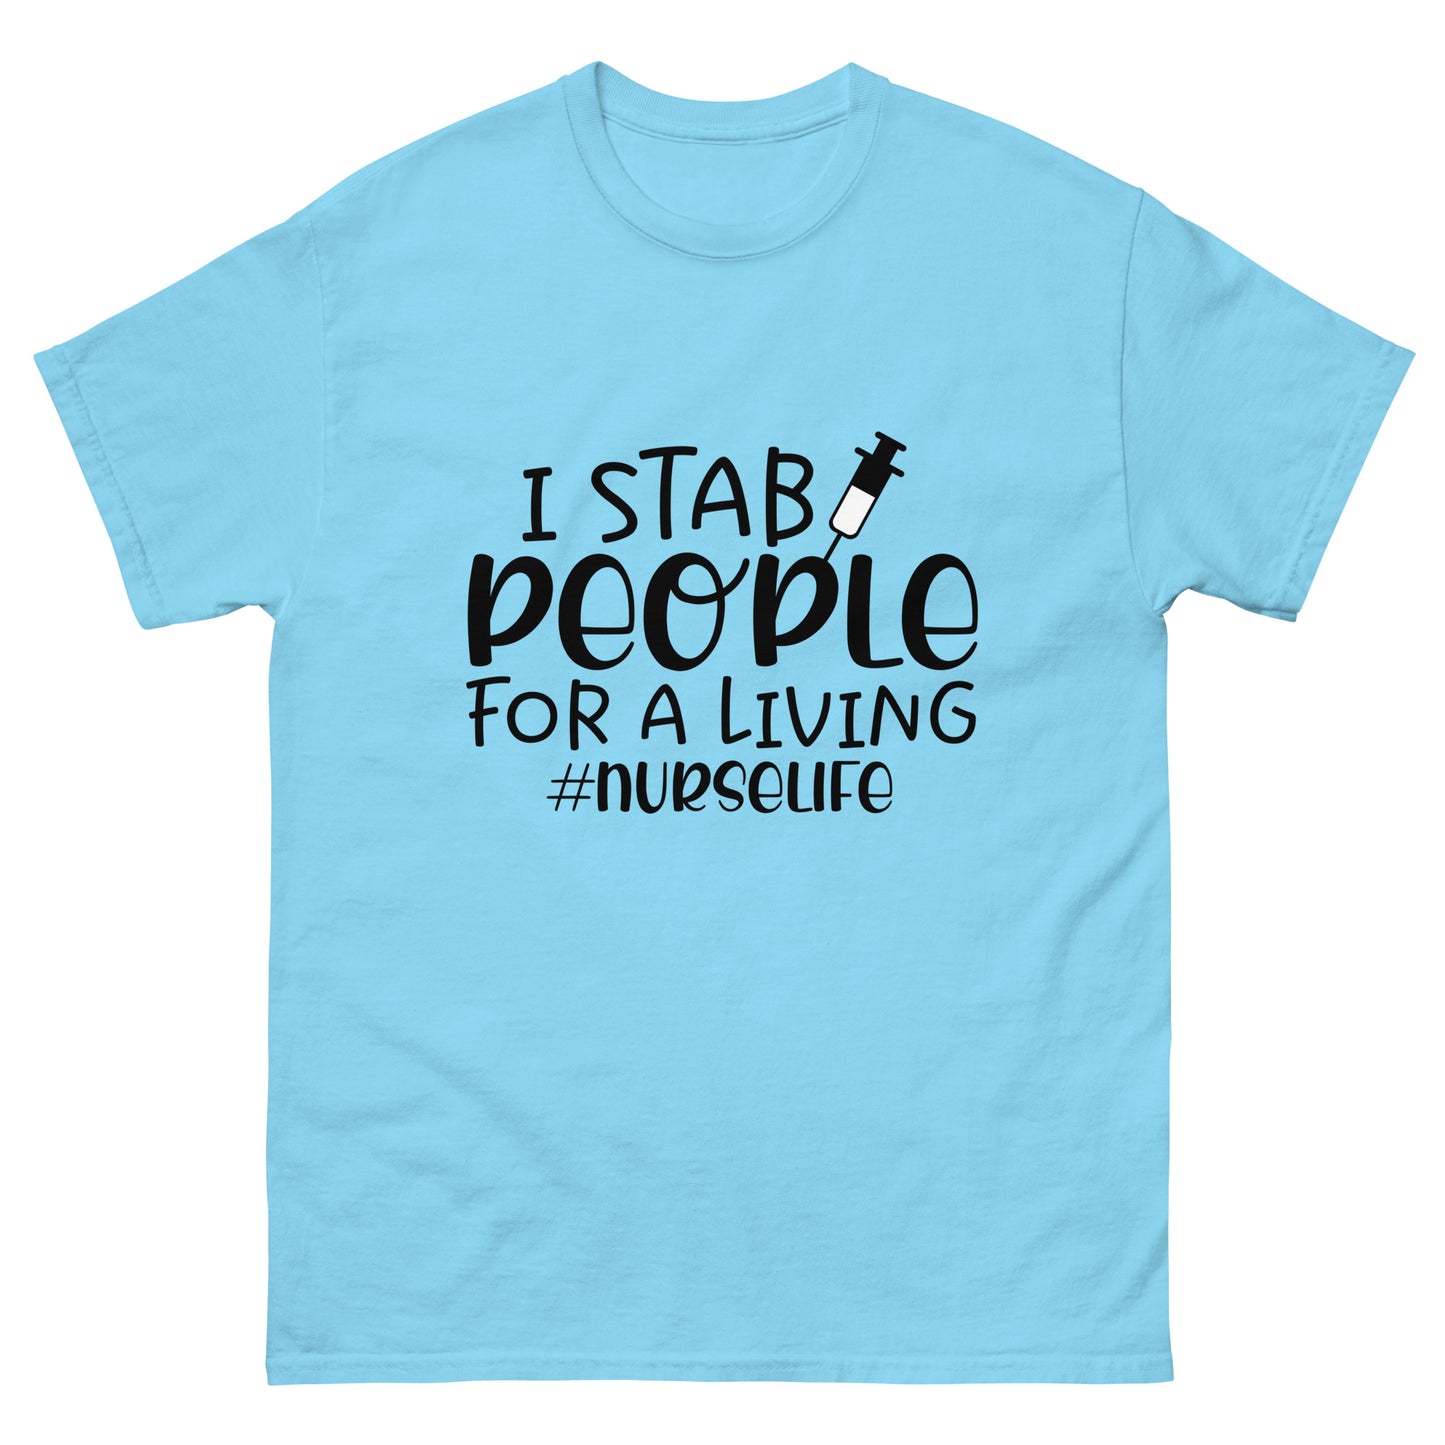 I stab people for a living - nursing - classic tee